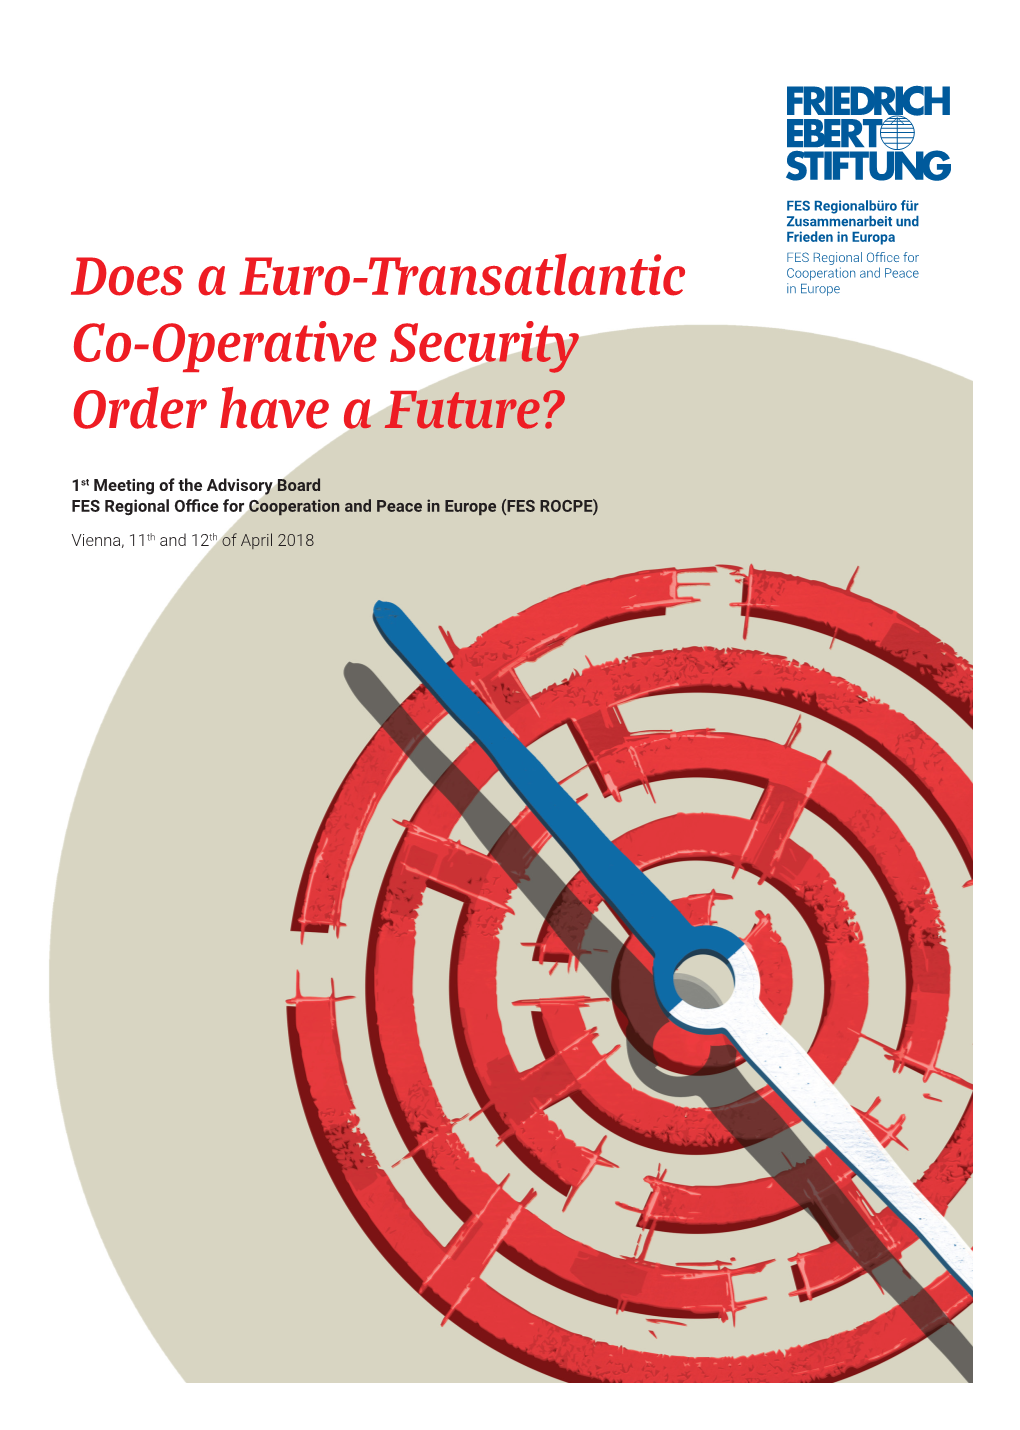 Does a Euro-Transatlantic Co-Operative Security Order Have a Future?